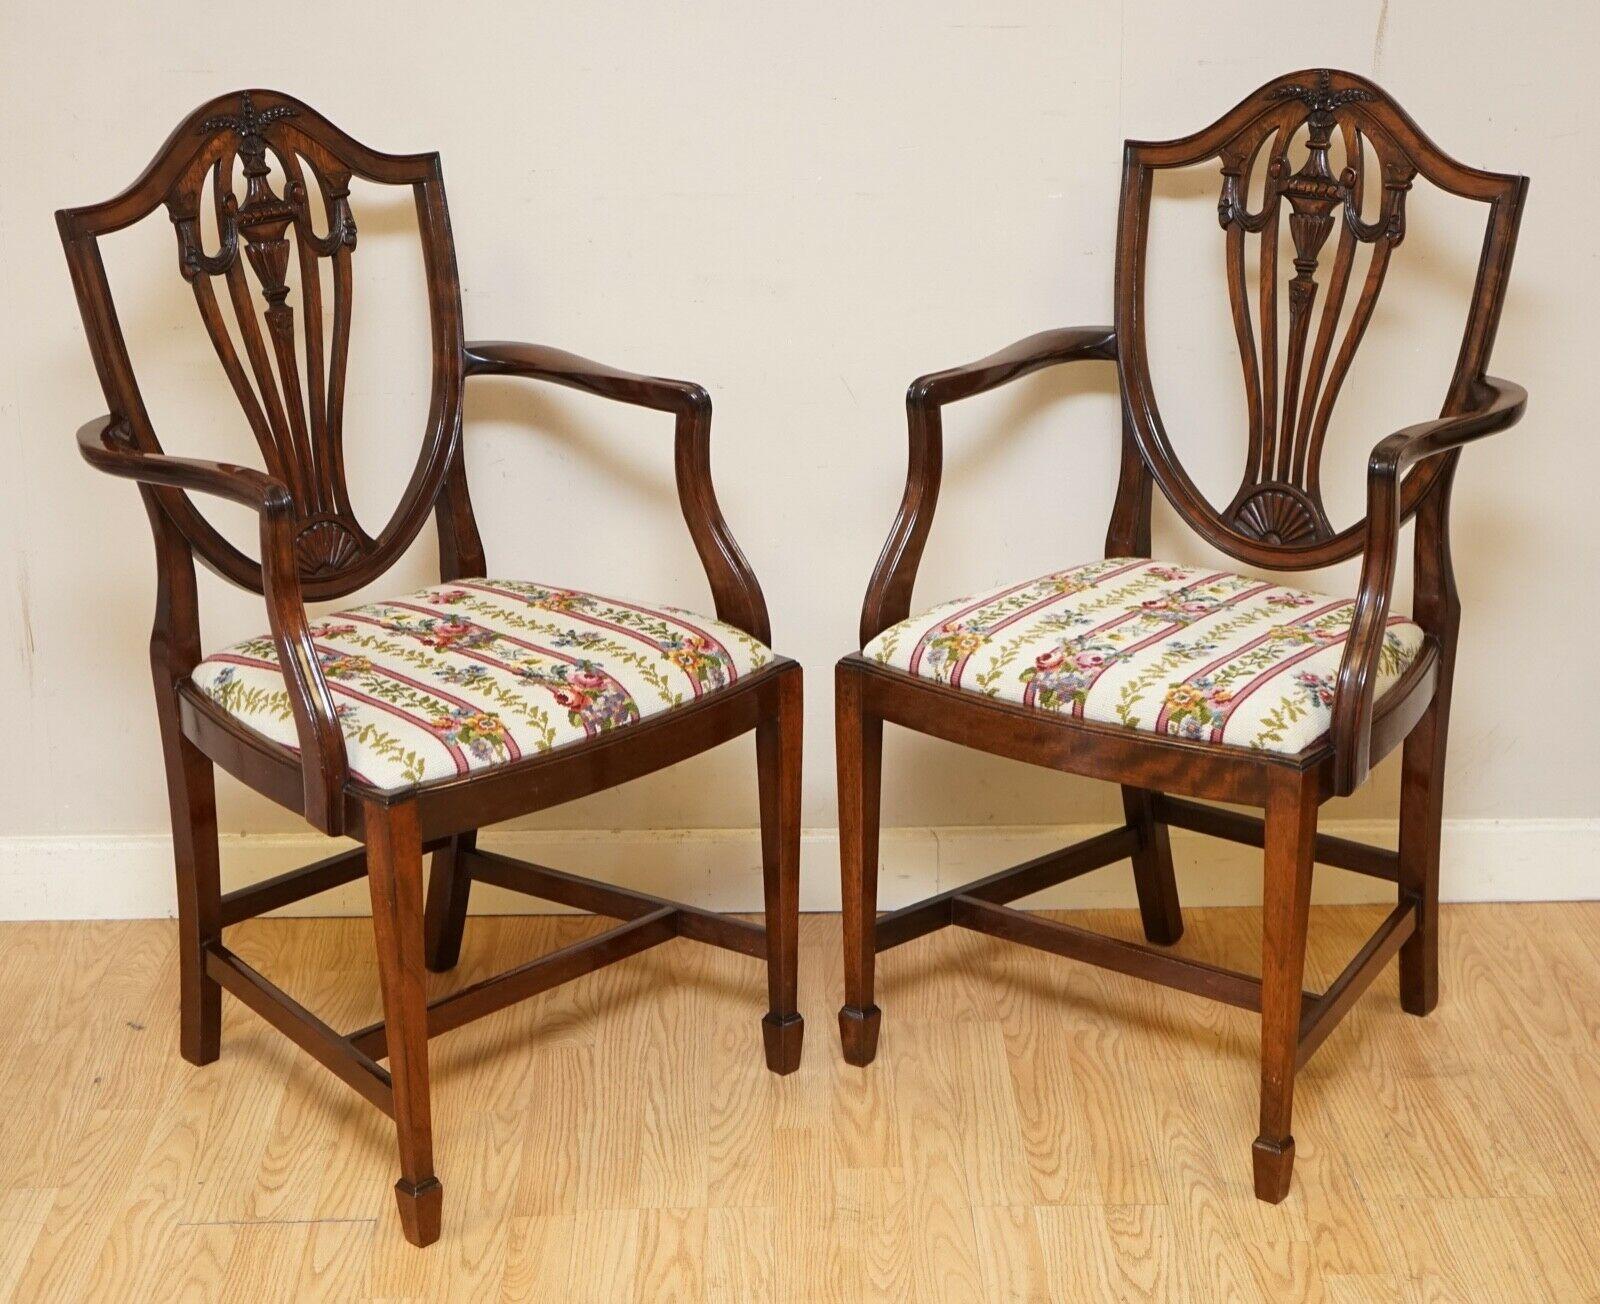 British Vintage Set of 6 Georgian Hepplewhite Style Dining Chairs with Woven Seats